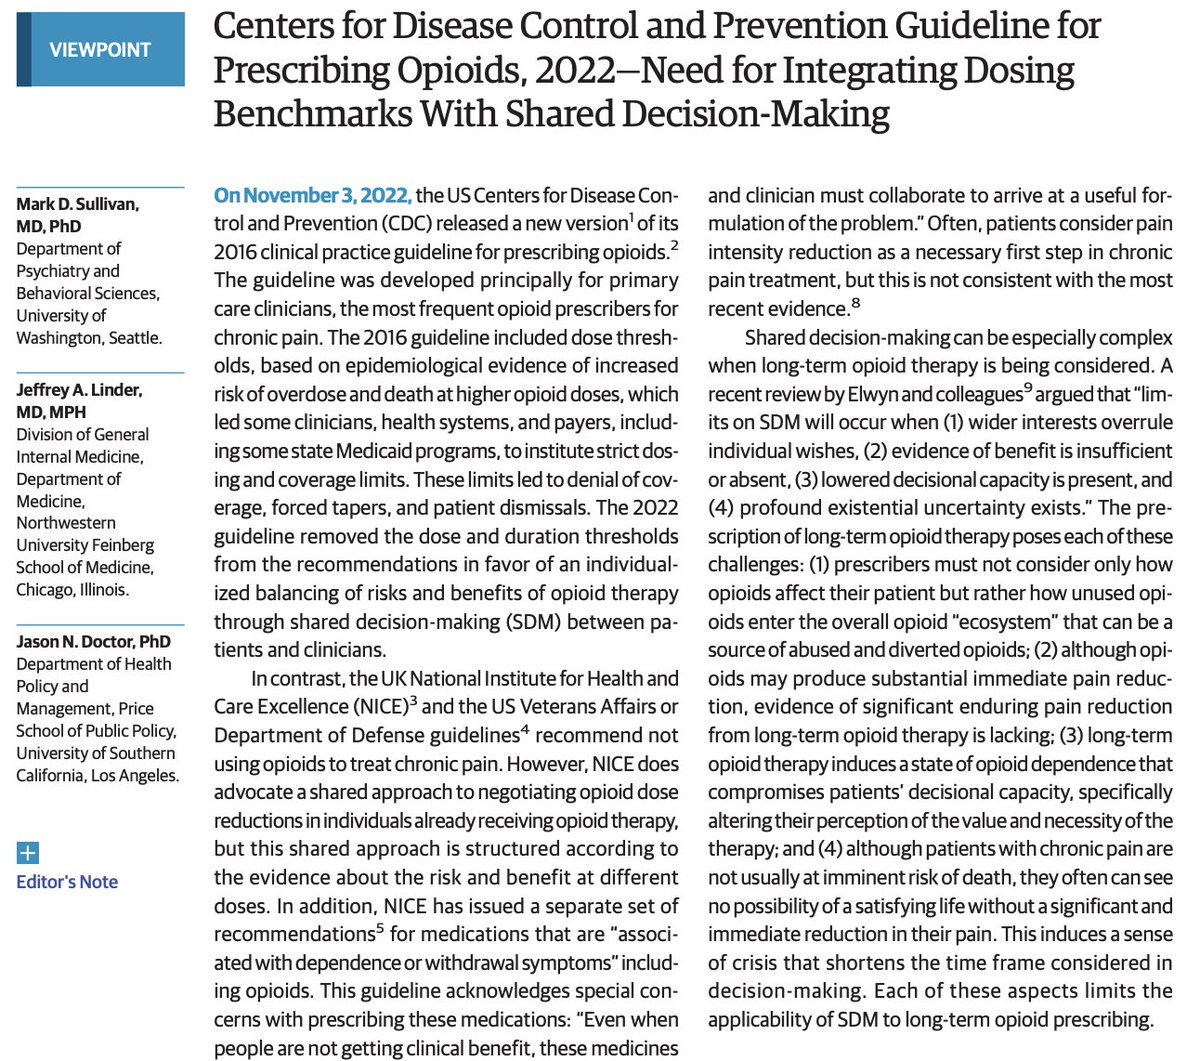 Our new paper on the CDC opioid guidelines and its relationship to shared decision-making. https://t.co/4AHVw46ryc https://t.co/WwpDp8tXdY